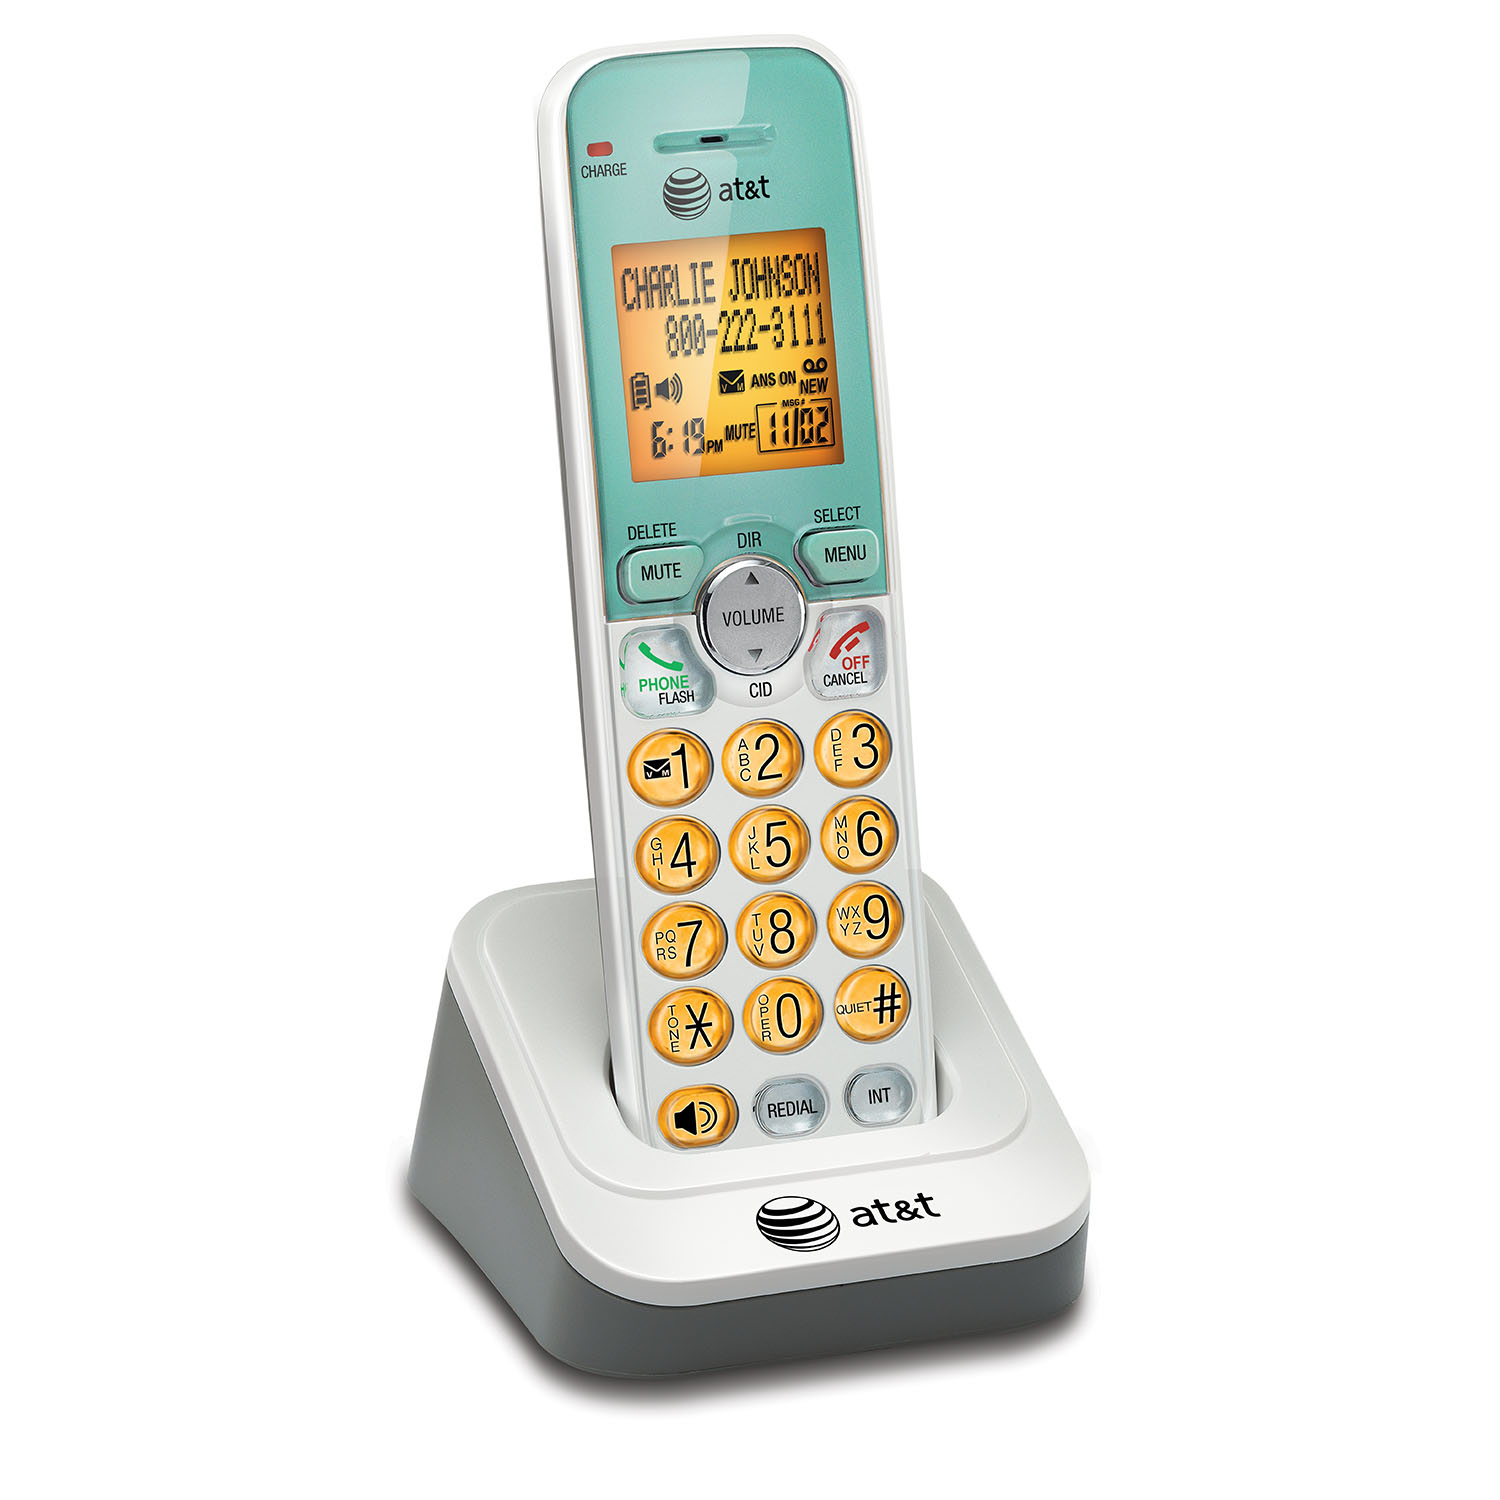 Accessory handset with caller ID/call waiting - view 3